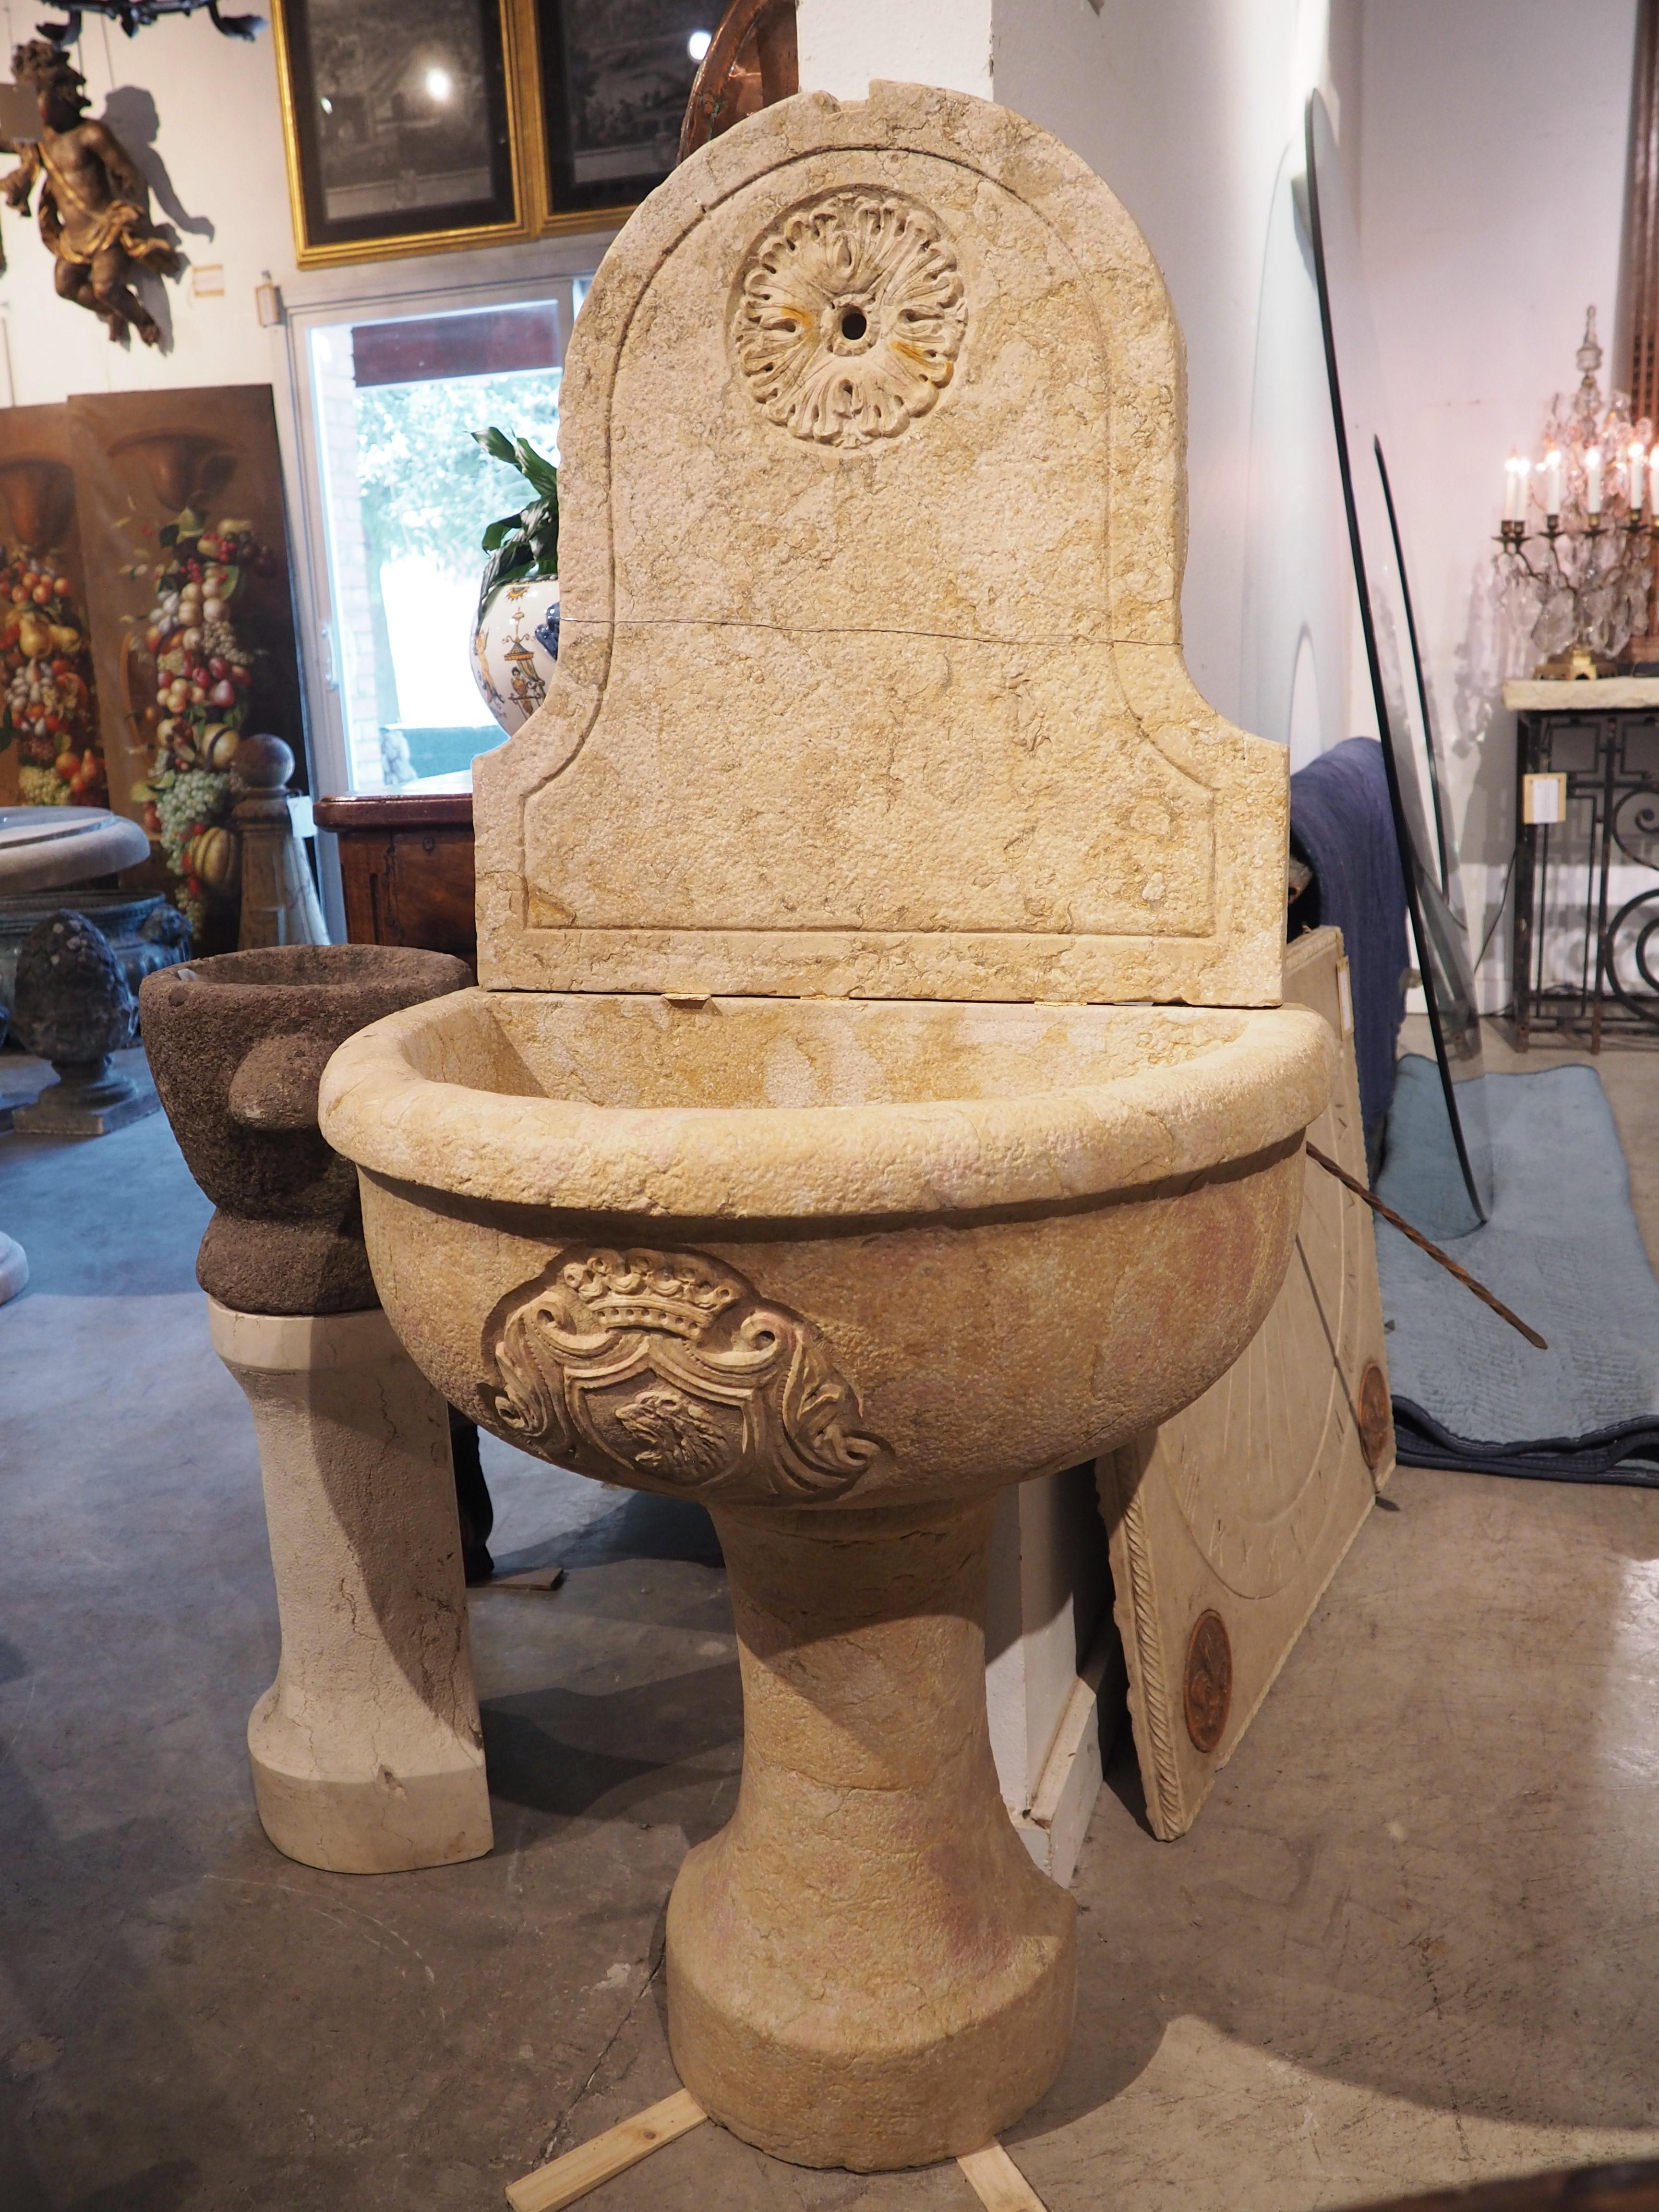 A lovely Italian wall fountain that has been hand-carved from three pieces of marble. The cream-colored stone has subtle brown and gold inclusions. A stout demi-lune basin (8 ½ inches tall) with quarter round edges sits on top of a half pedestal